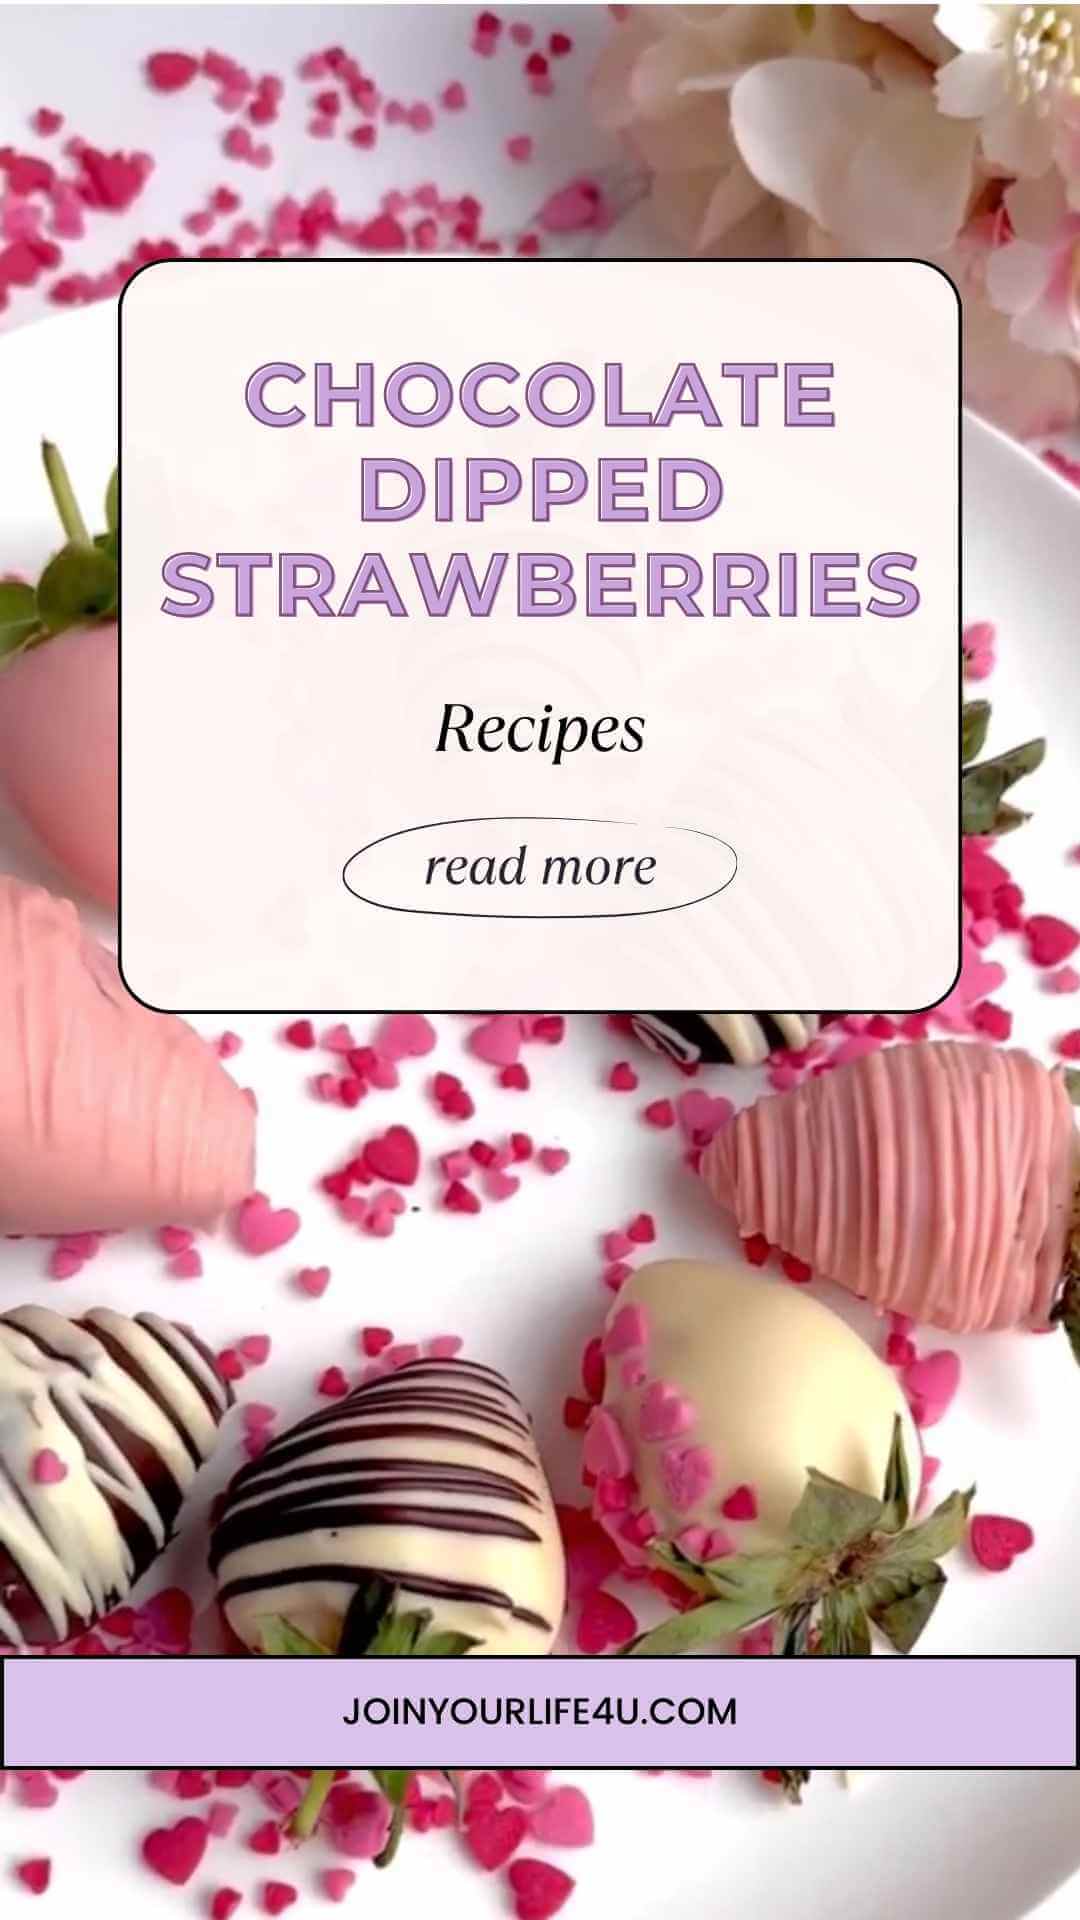 Colorful strawberries dipped in chocolate. Some are pink, red, or white, while others have dark chocolate. Each berry is decorated with striped chocolate designs, making them look delicious and pretty.